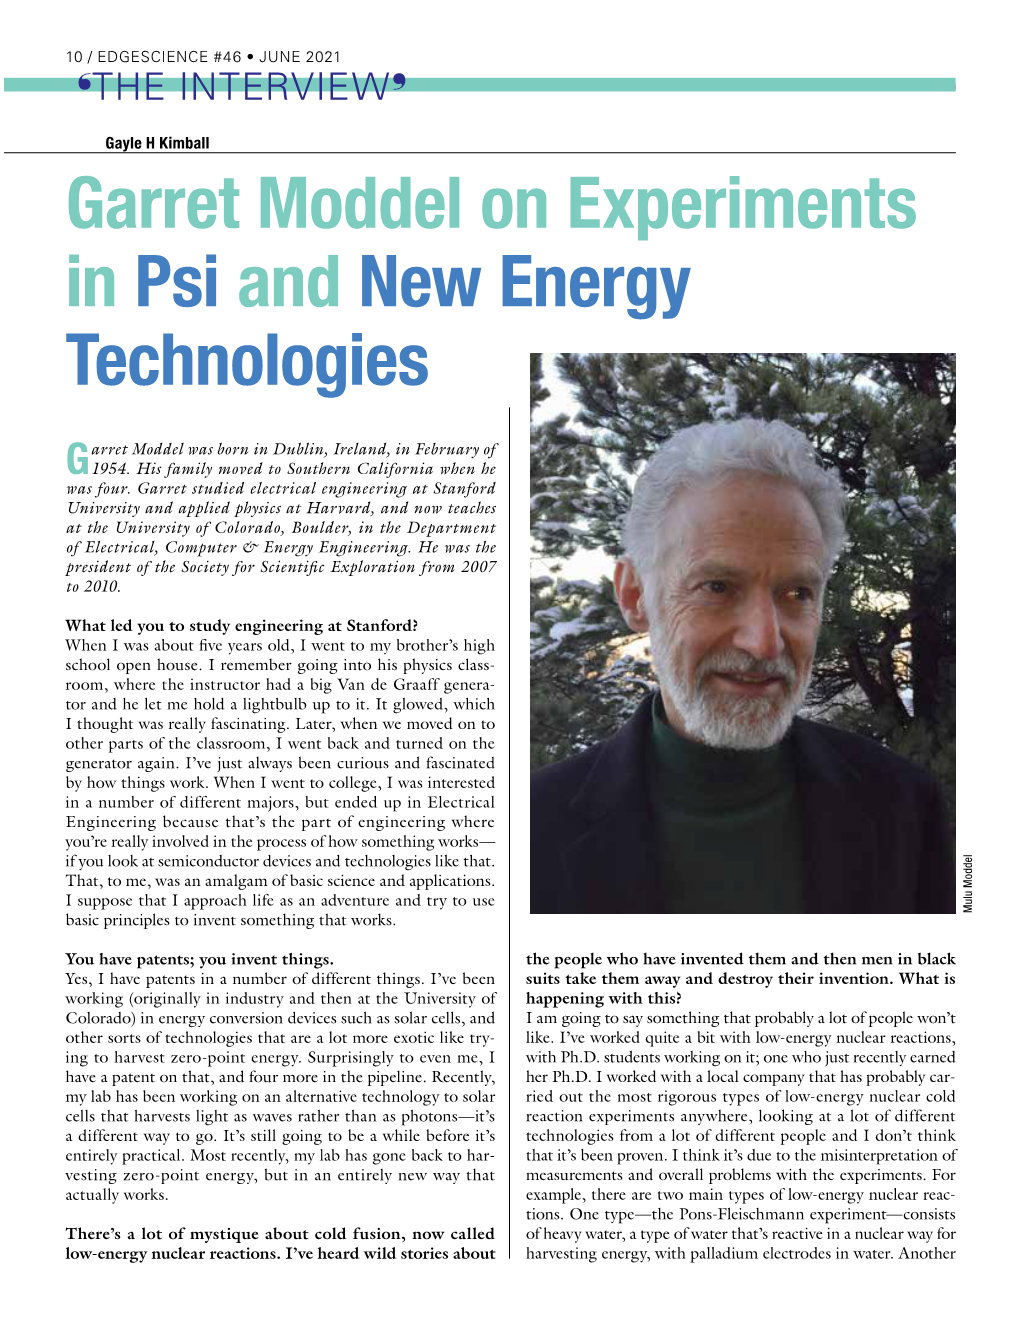 Garret Moddel on Experiments in Psi and New Energy Technologies